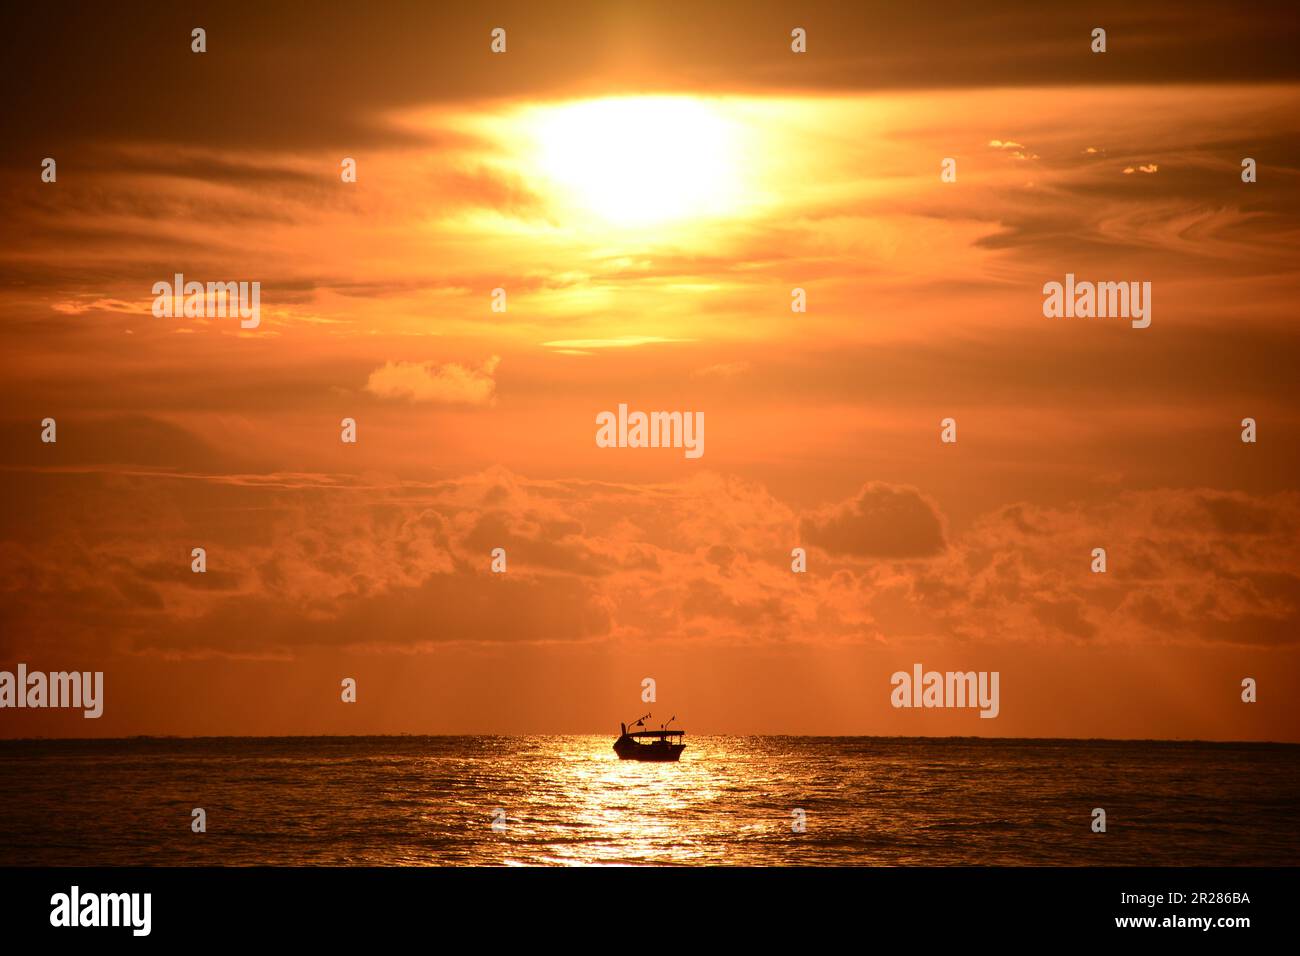 Sunset Over the Ocean with Boat Silhouette. The vibrant hues of the setting sun paint the sky in a symphony of warm colors Stock Photo